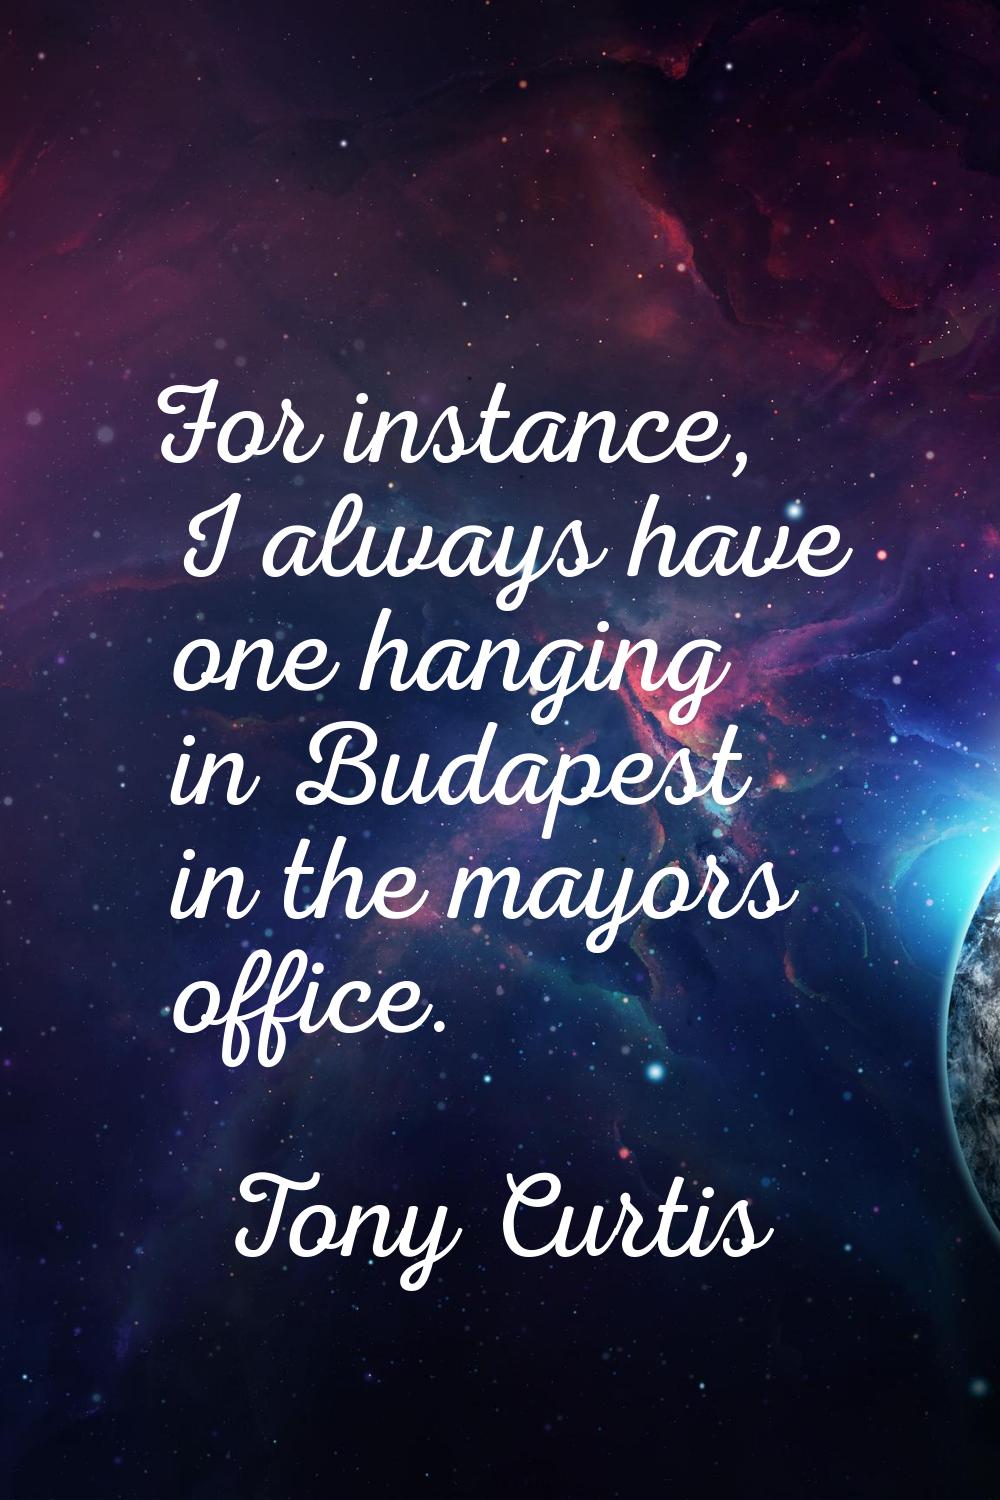 For instance, I always have one hanging in Budapest in the mayors office.